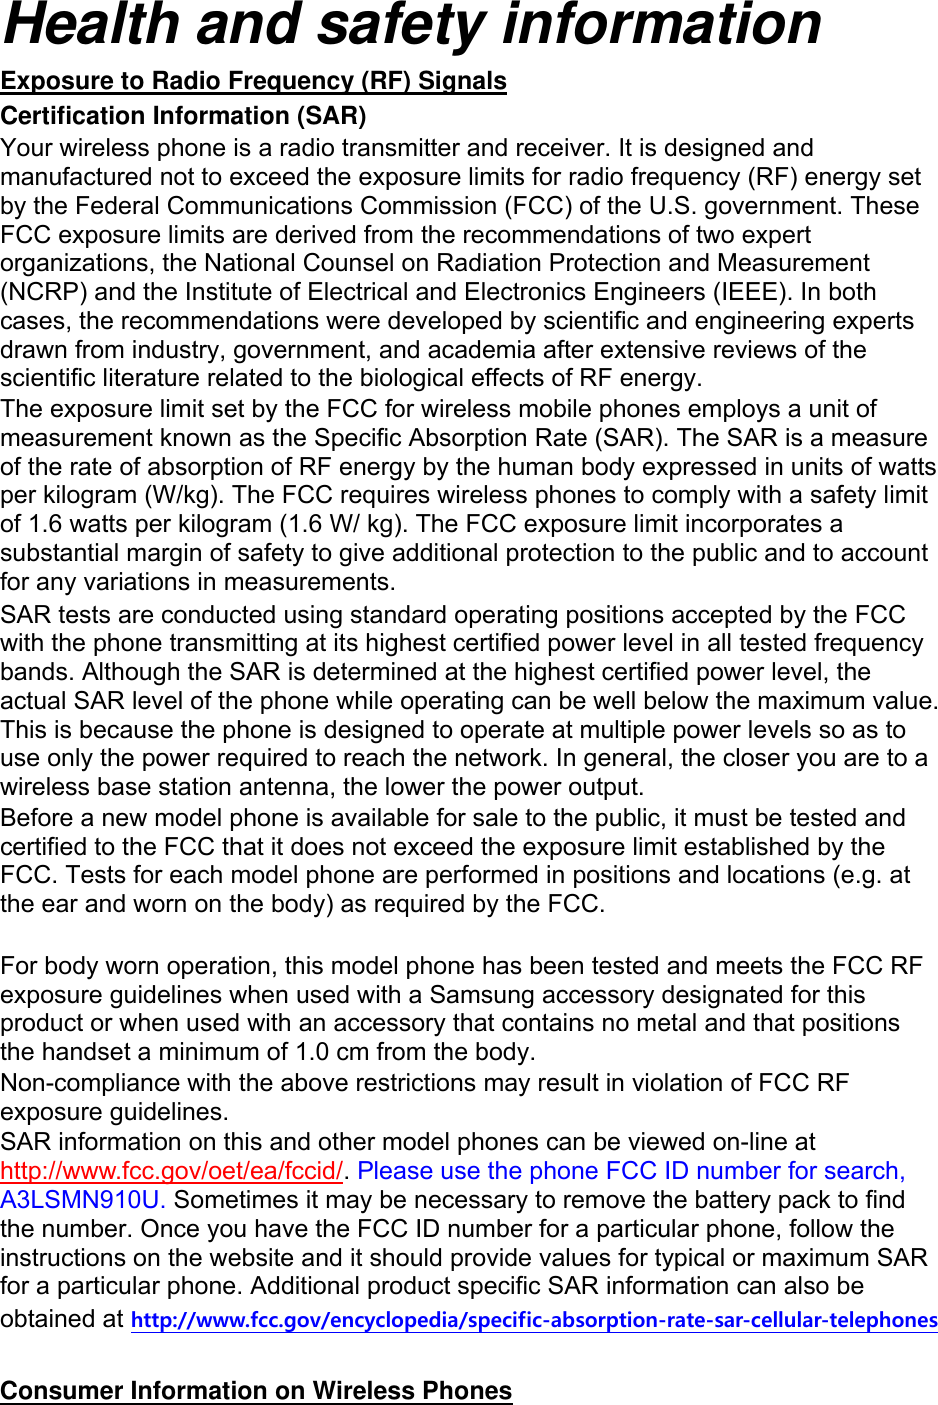 Health and safety information Exposure to Radio Frequency (RF) Signals Certification Information (SAR) Your wireless phone is a radio transmitter and receiver. It is designed and manufactured not to exceed the exposure limits for radio frequency (RF) energy set by the Federal Communications Commission (FCC) of the U.S. government. These FCC exposure limits are derived from the recommendations of two expert organizations, the National Counsel on Radiation Protection and Measurement (NCRP) and the Institute of Electrical and Electronics Engineers (IEEE). In both cases, the recommendations were developed by scientific and engineering experts drawn from industry, government, and academia after extensive reviews of the scientific literature related to the biological effects of RF energy. The exposure limit set by the FCC for wireless mobile phones employs a unit of measurement known as the Specific Absorption Rate (SAR). The SAR is a measure of the rate of absorption of RF energy by the human body expressed in units of watts per kilogram (W/kg). The FCC requires wireless phones to comply with a safety limit of 1.6 watts per kilogram (1.6 W/ kg). The FCC exposure limit incorporates a substantial margin of safety to give additional protection to the public and to account for any variations in measurements. SAR tests are conducted using standard operating positions accepted by the FCC with the phone transmitting at its highest certified power level in all tested frequency bands. Although the SAR is determined at the highest certified power level, the actual SAR level of the phone while operating can be well below the maximum value. This is because the phone is designed to operate at multiple power levels so as to use only the power required to reach the network. In general, the closer you are to a wireless base station antenna, the lower the power output. Before a new model phone is available for sale to the public, it must be tested and certified to the FCC that it does not exceed the exposure limit established by the FCC. Tests for each model phone are performed in positions and locations (e.g. at the ear and worn on the body) as required by the FCC.      For body worn operation, this model phone has been tested and meets the FCC RF exposure guidelines when used with a Samsung accessory designated for this product or when used with an accessory that contains no metal and that positions the handset a minimum of 1.0 cm from the body.   Non-compliance with the above restrictions may result in violation of FCC RF exposure guidelines. SAR information on this and other model phones can be viewed on-line at http://www.fcc.gov/oet/ea/fccid/. Please use the phone FCC ID number for search, A3LSMN910U. Sometimes it may be necessary to remove the battery pack to find the number. Once you have the FCC ID number for a particular phone, follow the instructions on the website and it should provide values for typical or maximum SAR for a particular phone. Additional product specific SAR information can also be obtained at http://www.fcc.gov/encyclopedia/specific-absorption-rate-sar-cellular-telephones  Consumer Information on Wireless Phones 